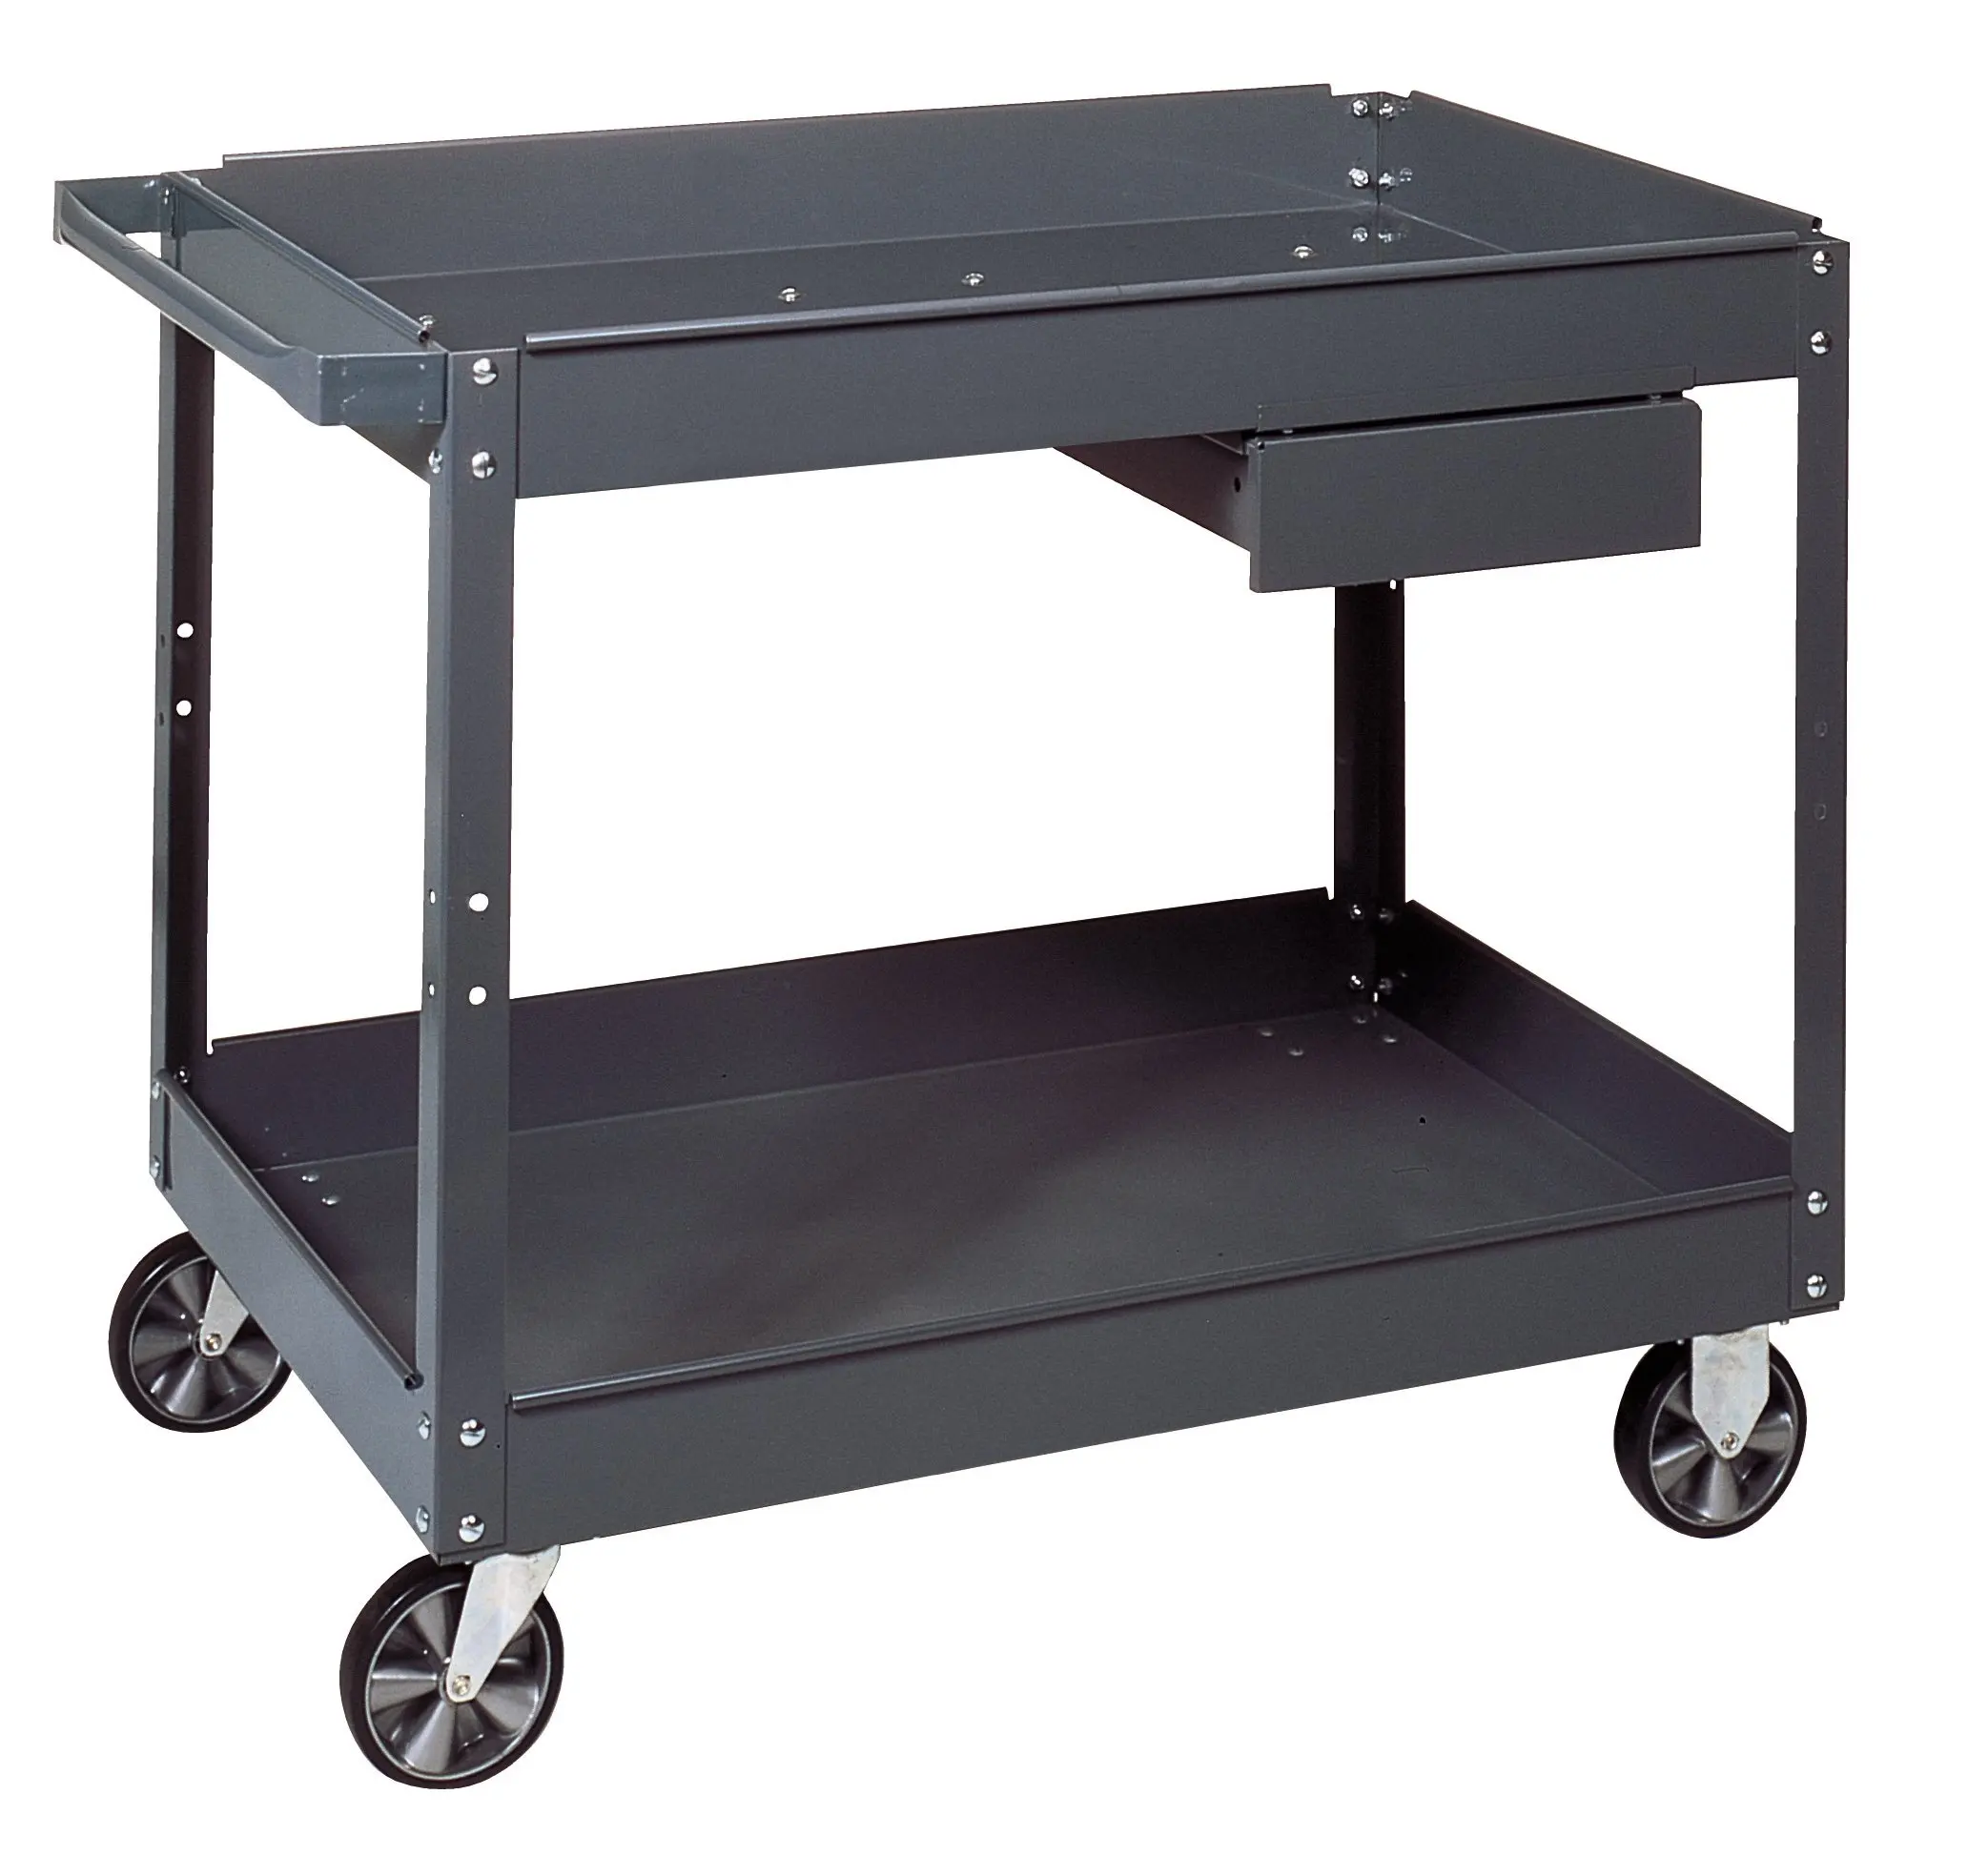 Sf6 service Cart easy Dry by synecom